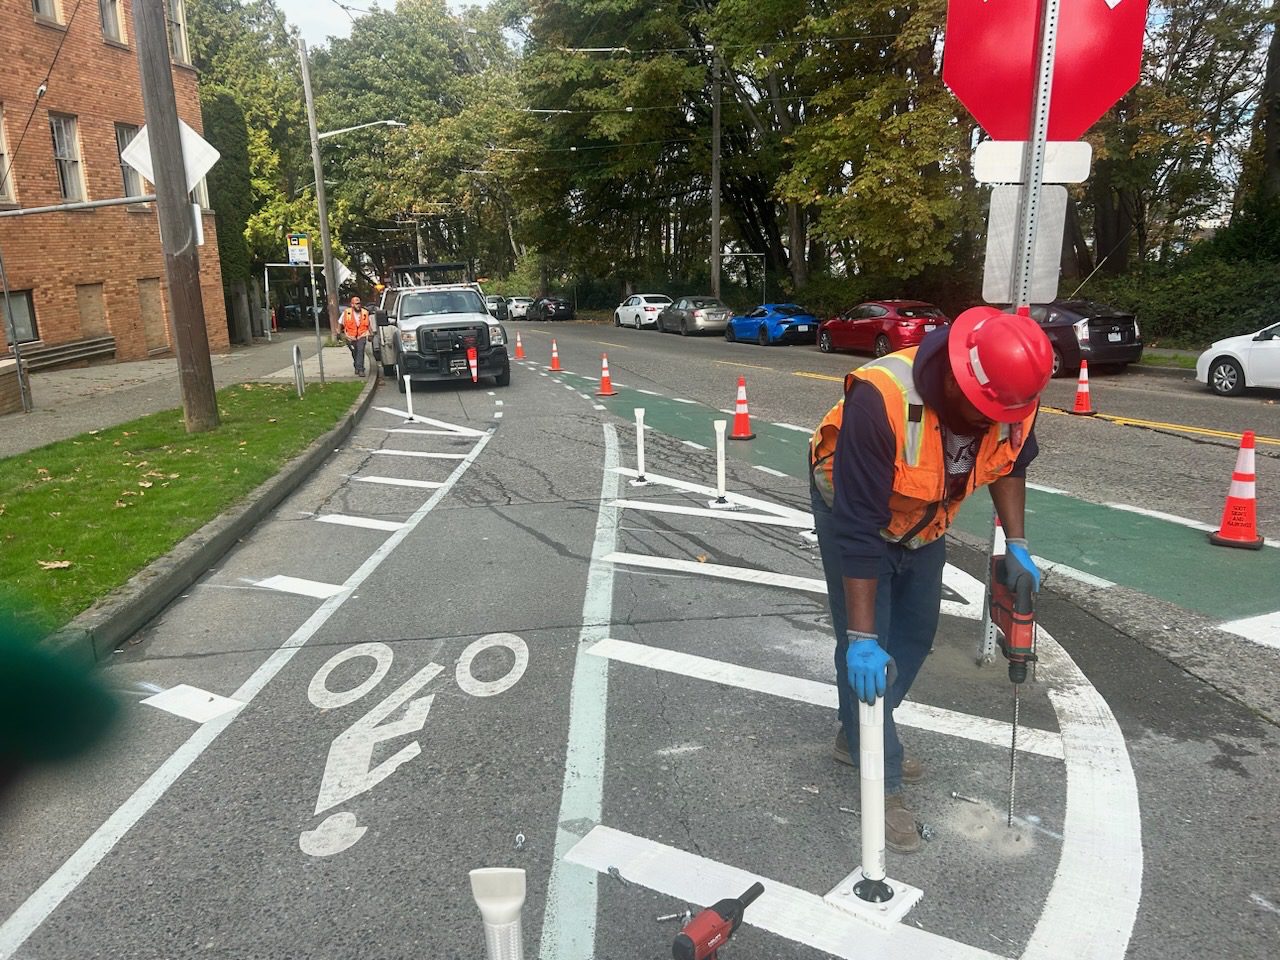 A worker wearing an orange vest and red hard hat installed flex posts as part of a new all-way stop, next to a marked bike route. Parked cars are in the background.